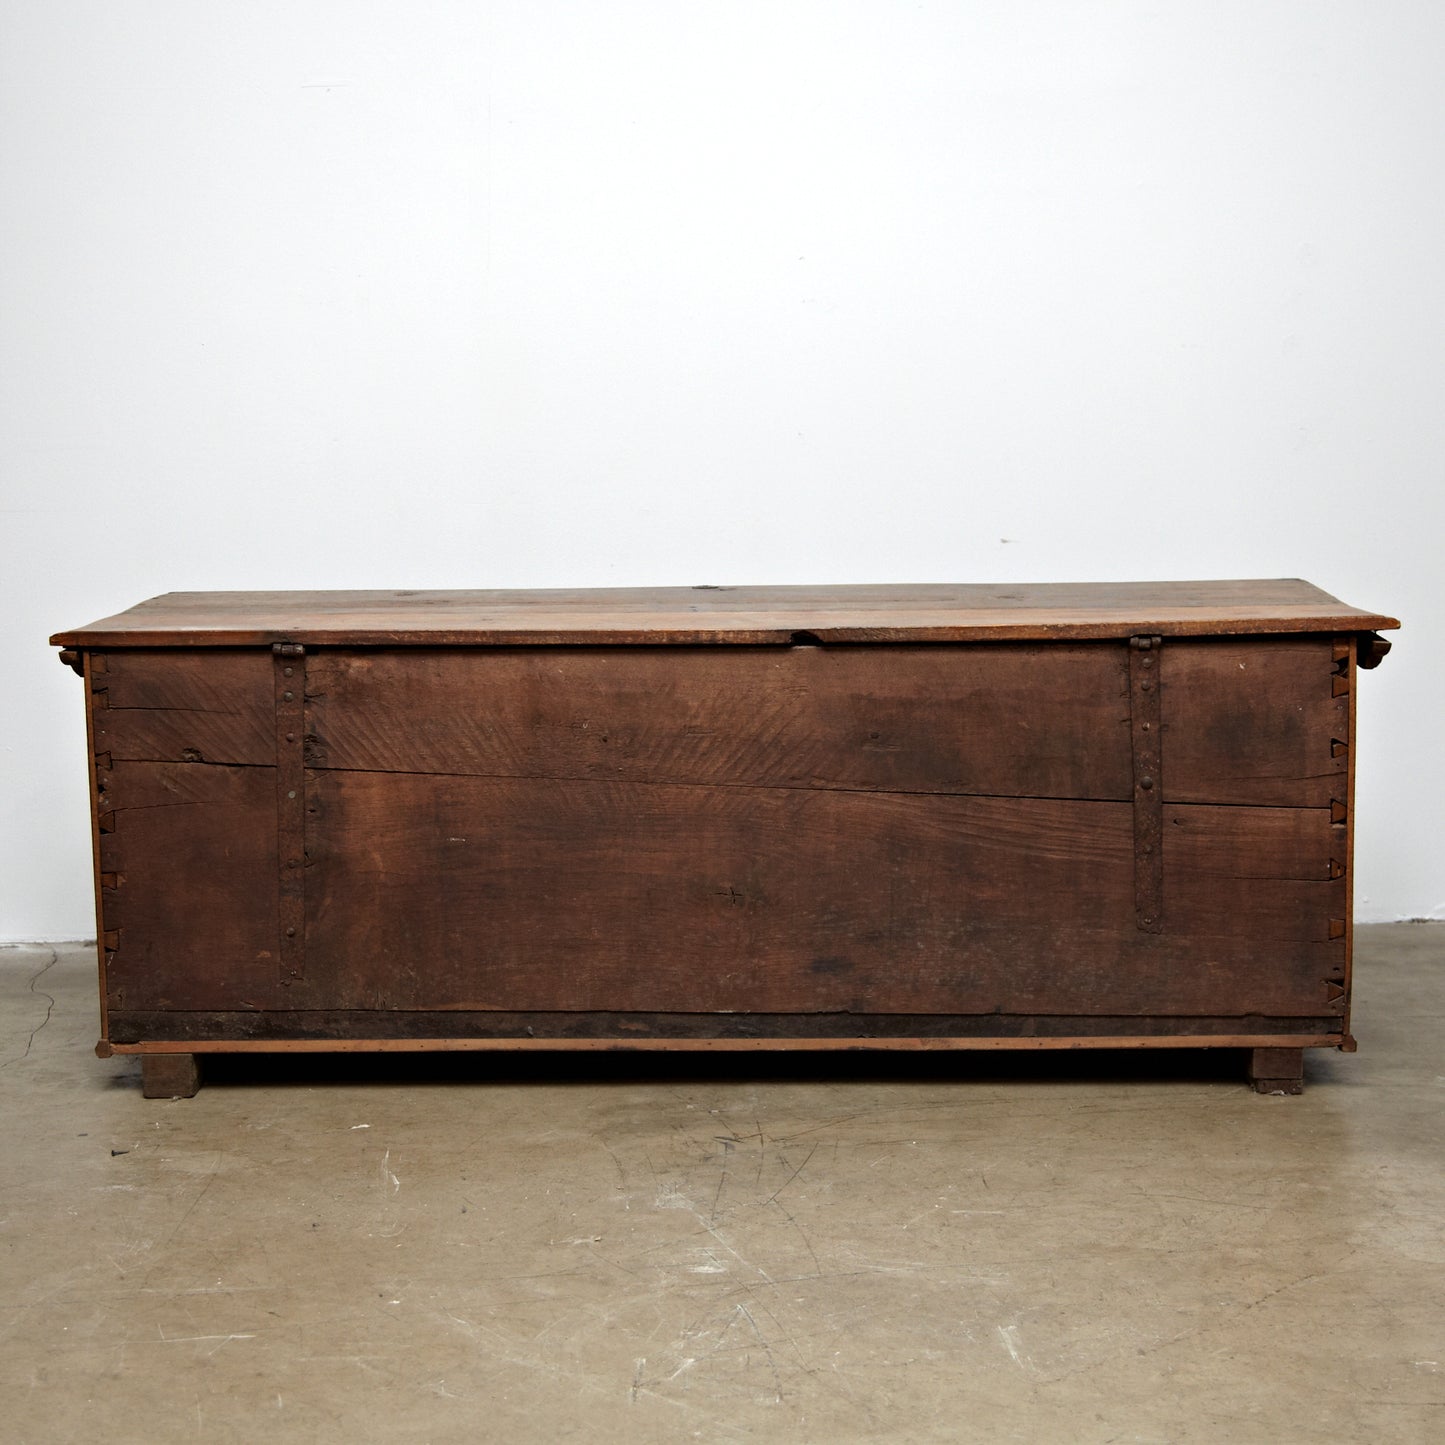 Early 18th Century Marriage Chest